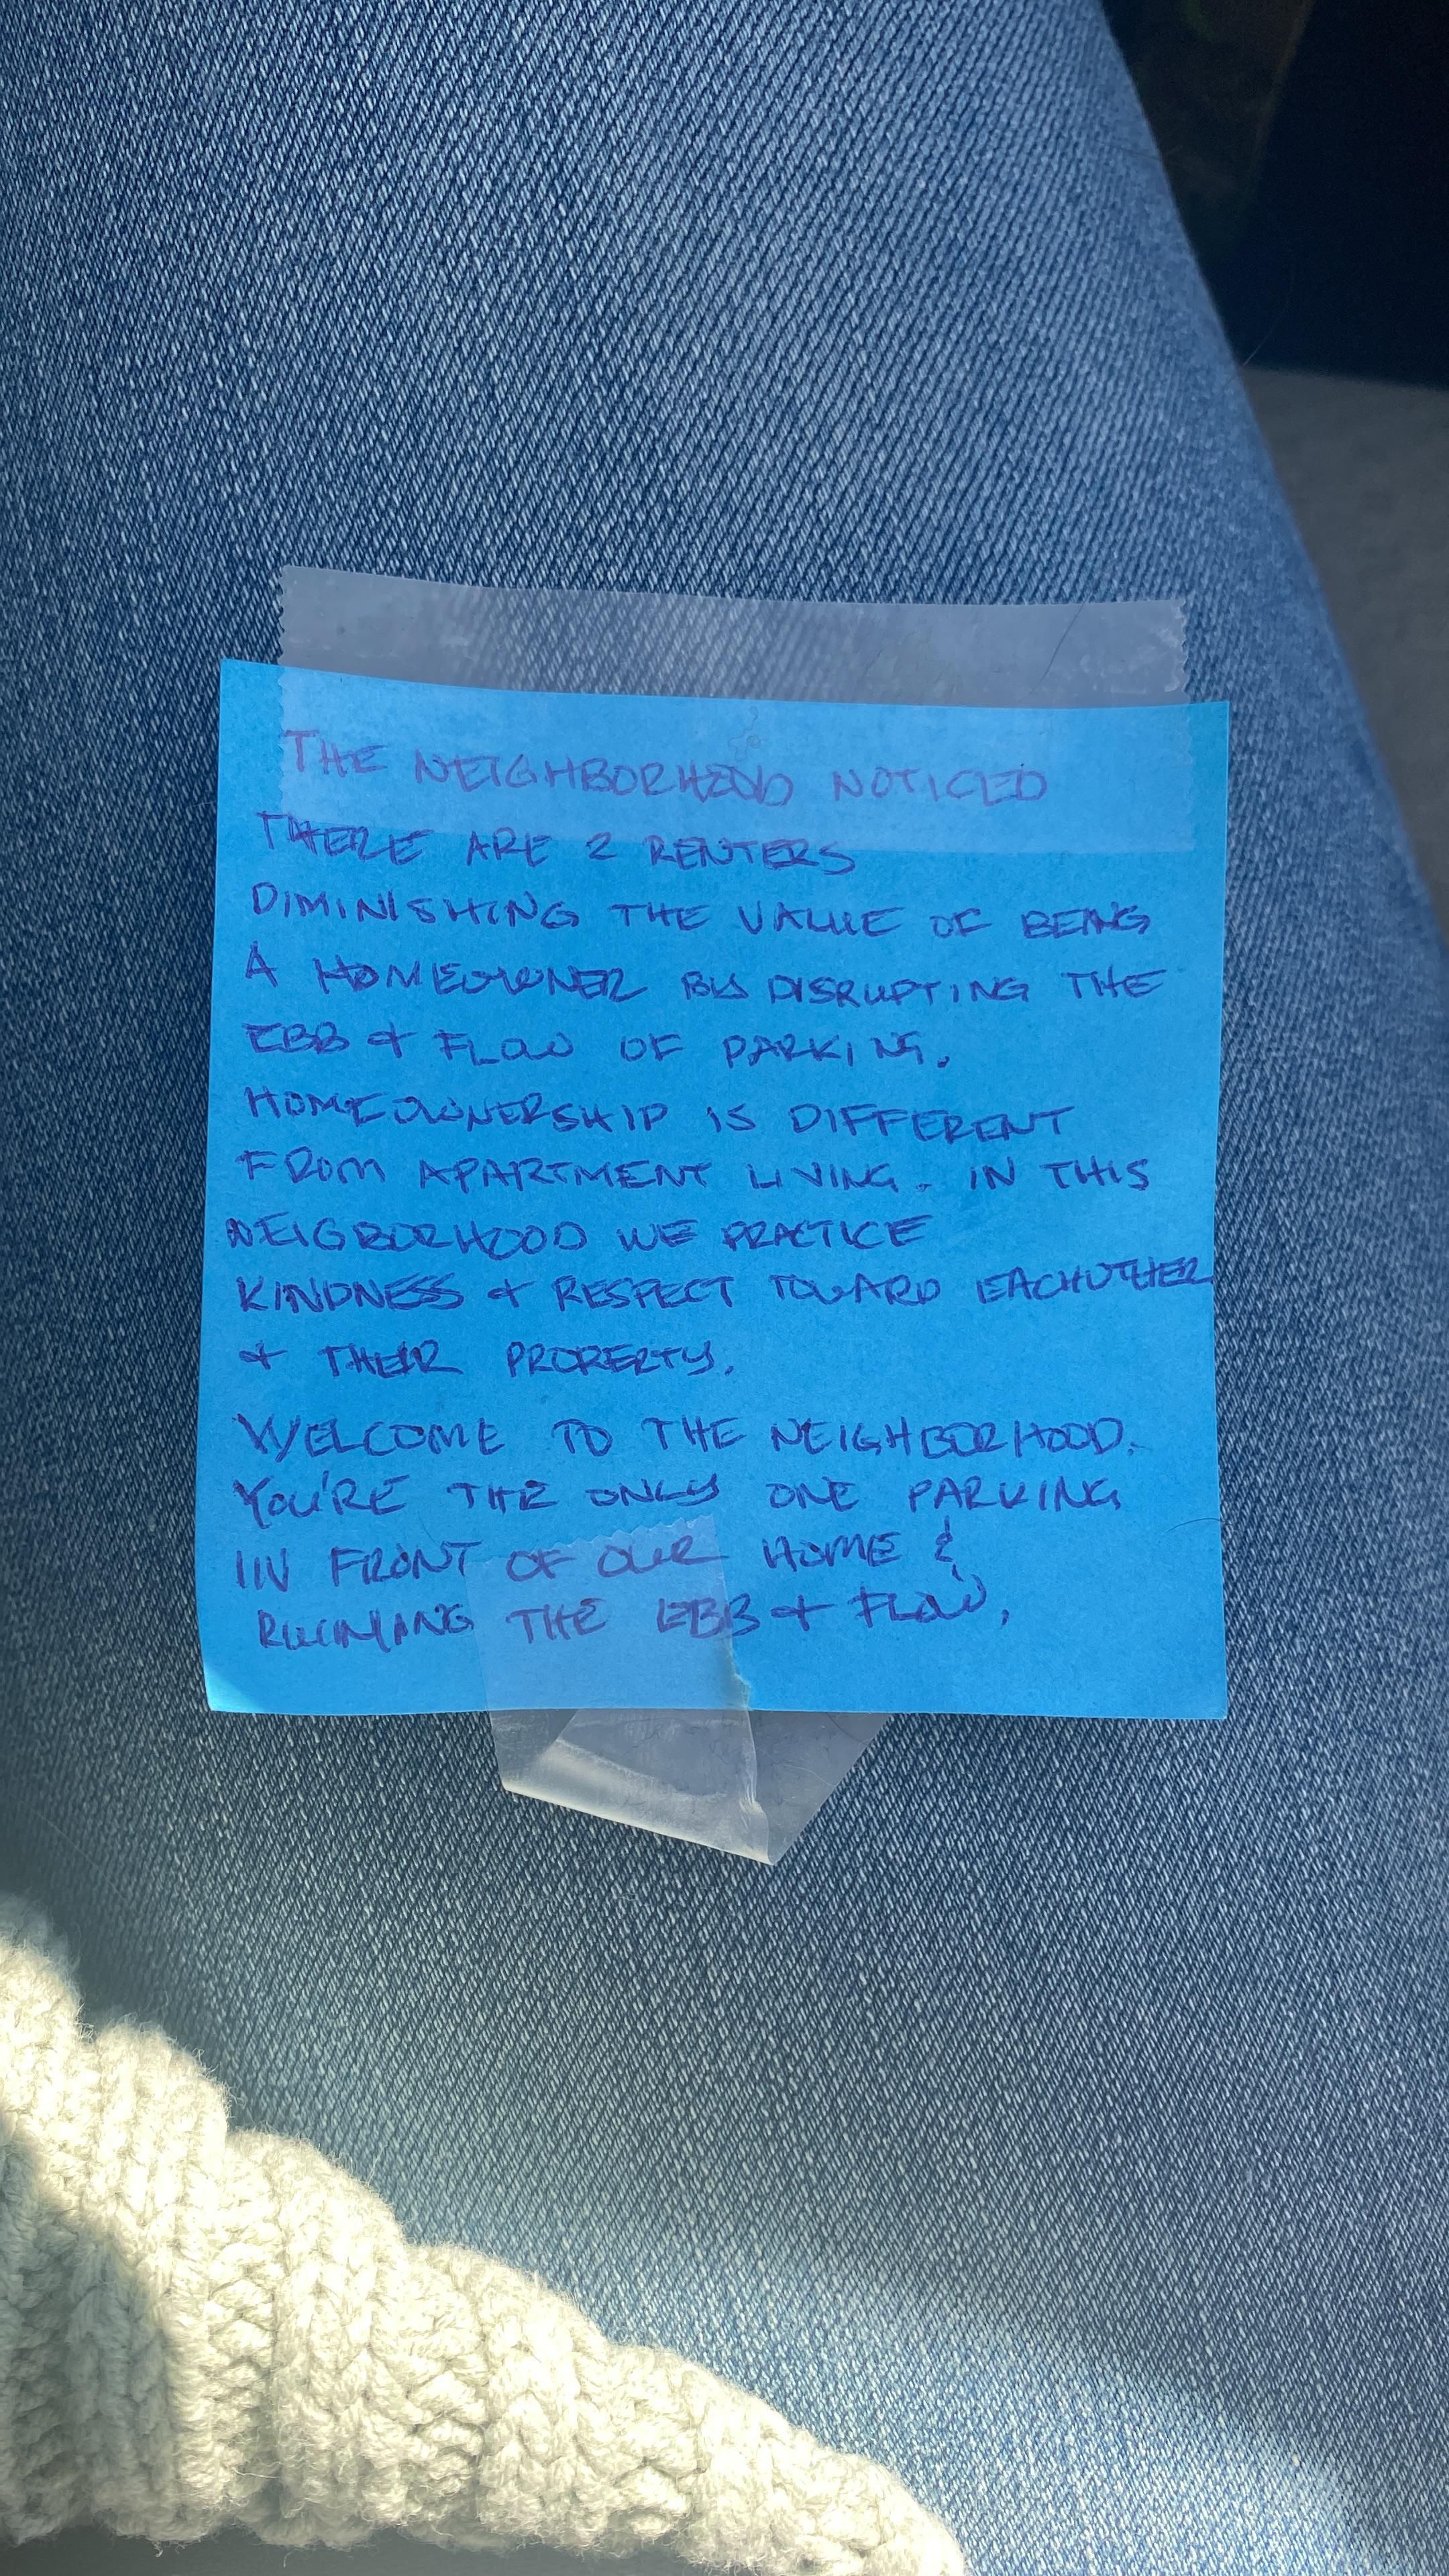 My friends got this note on their car for parking on the public street